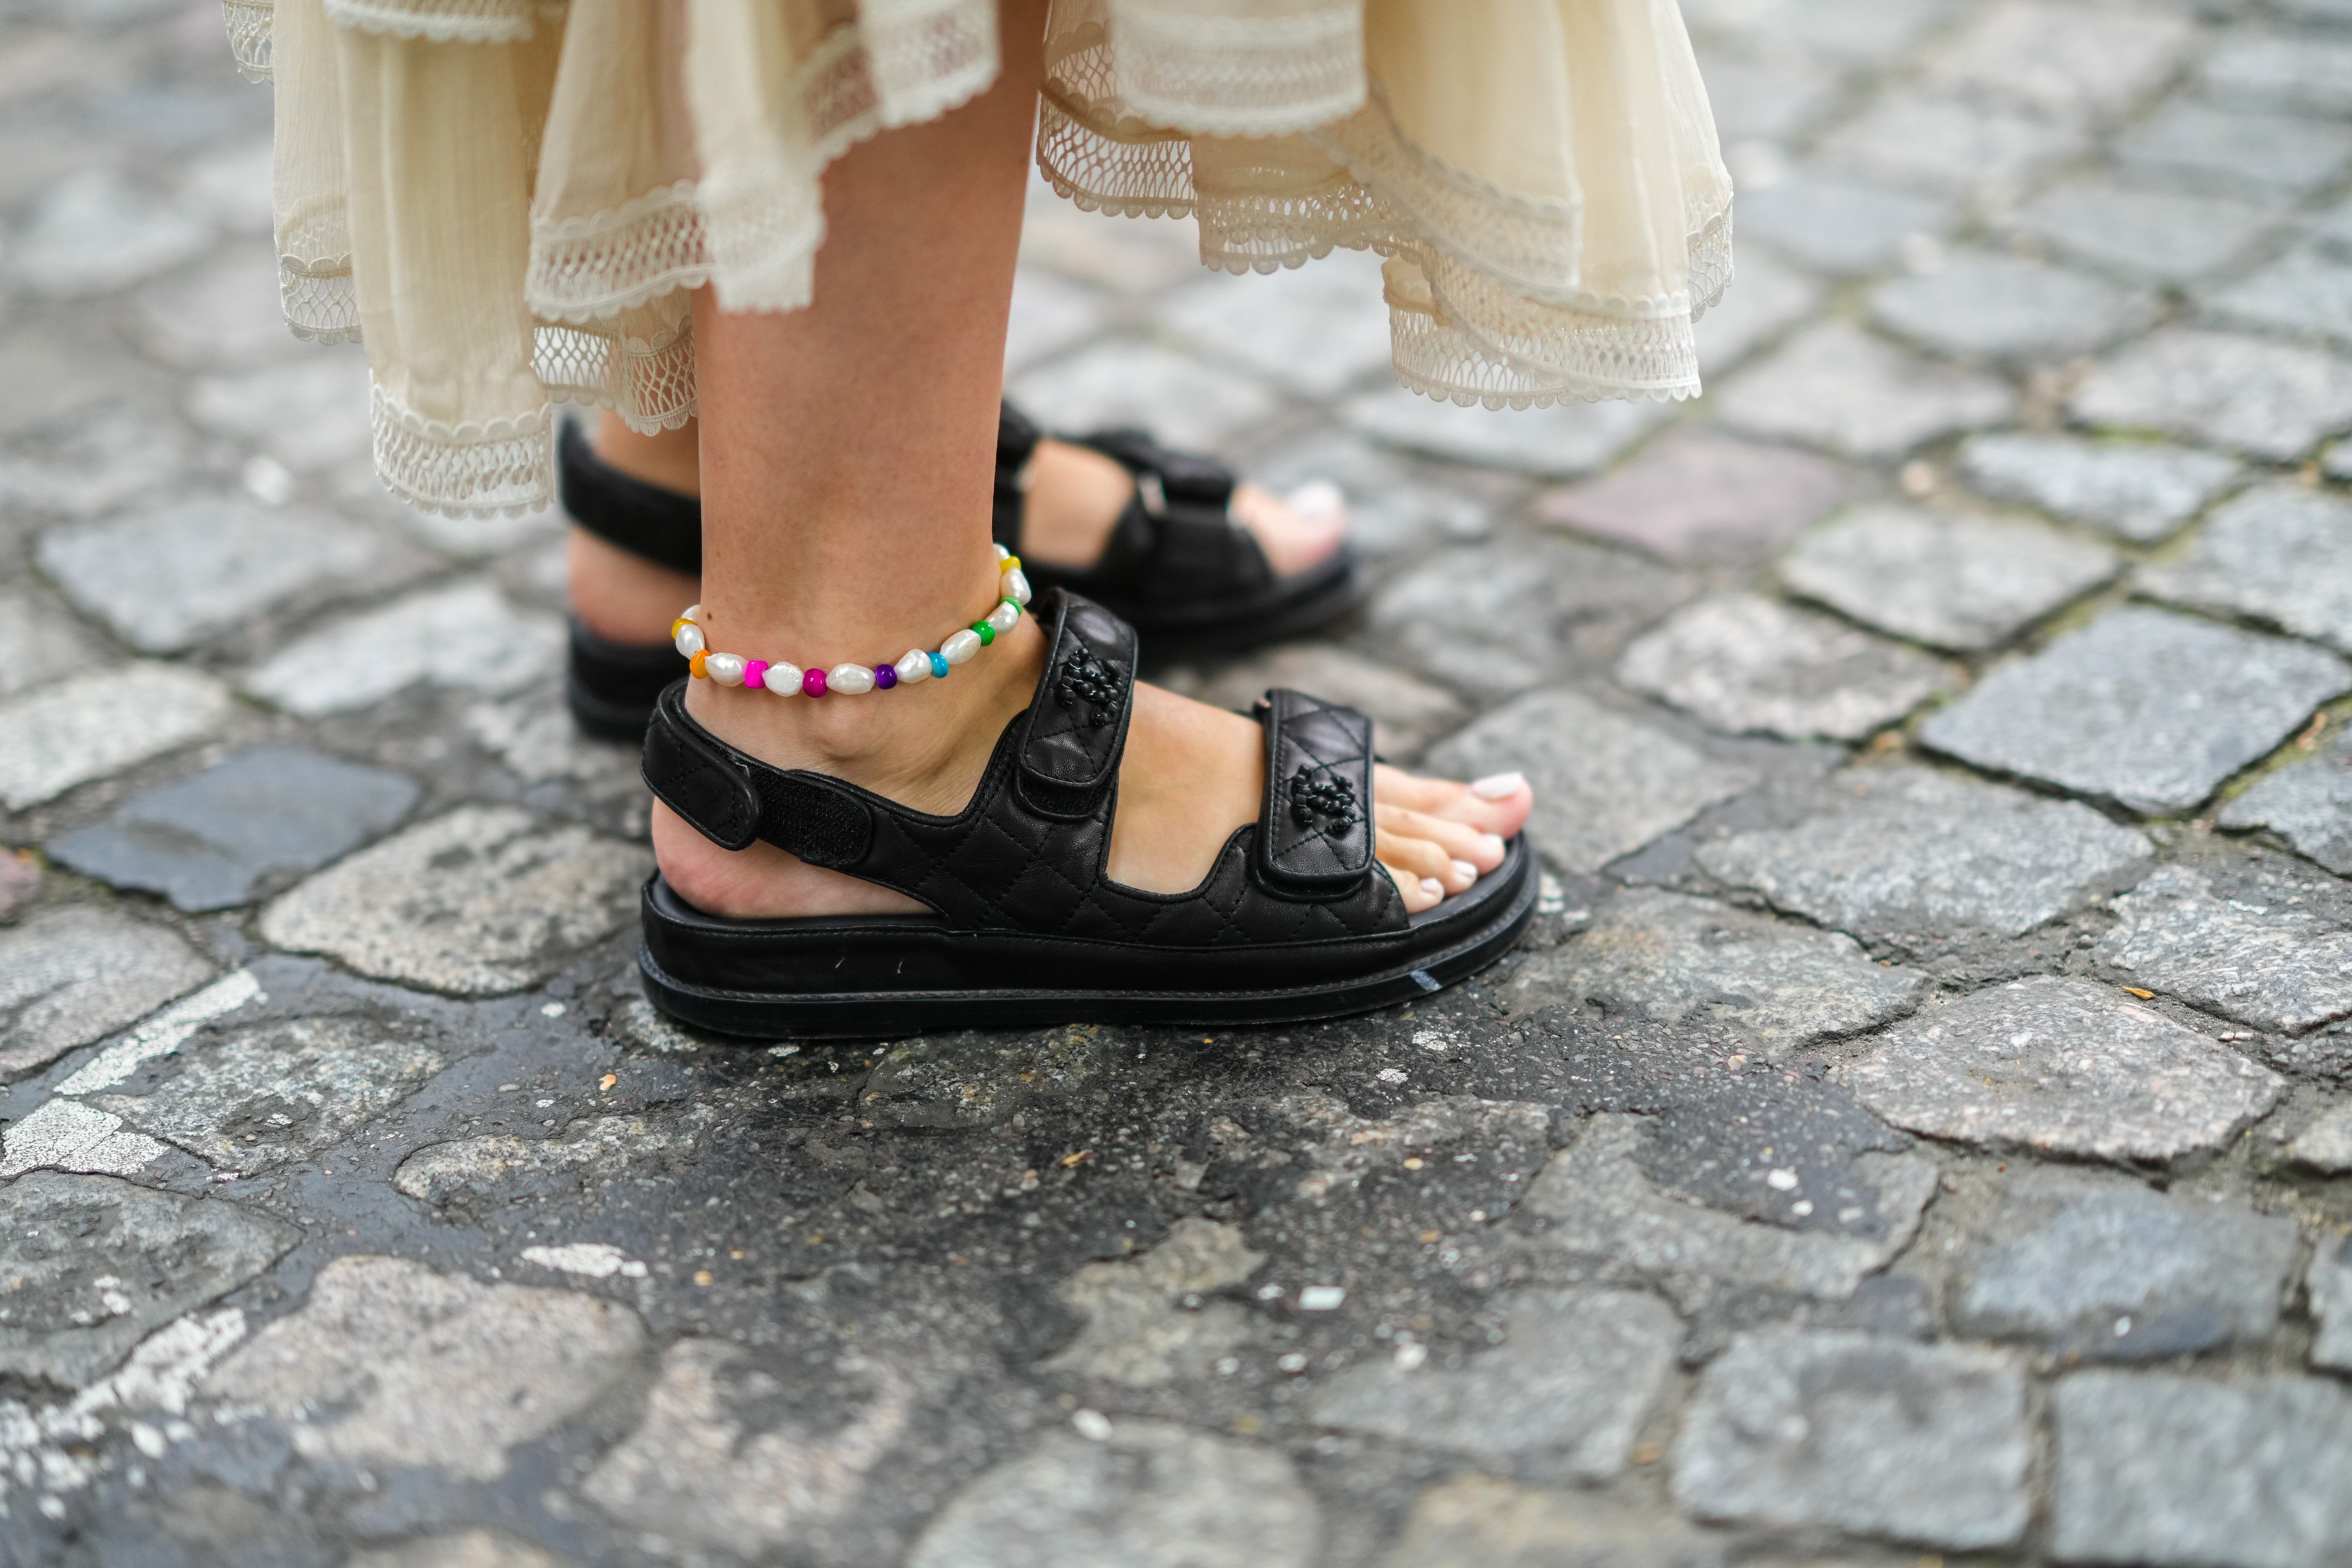 13 Anklets on Sale to Wear With Your Favorite Summer Sandals